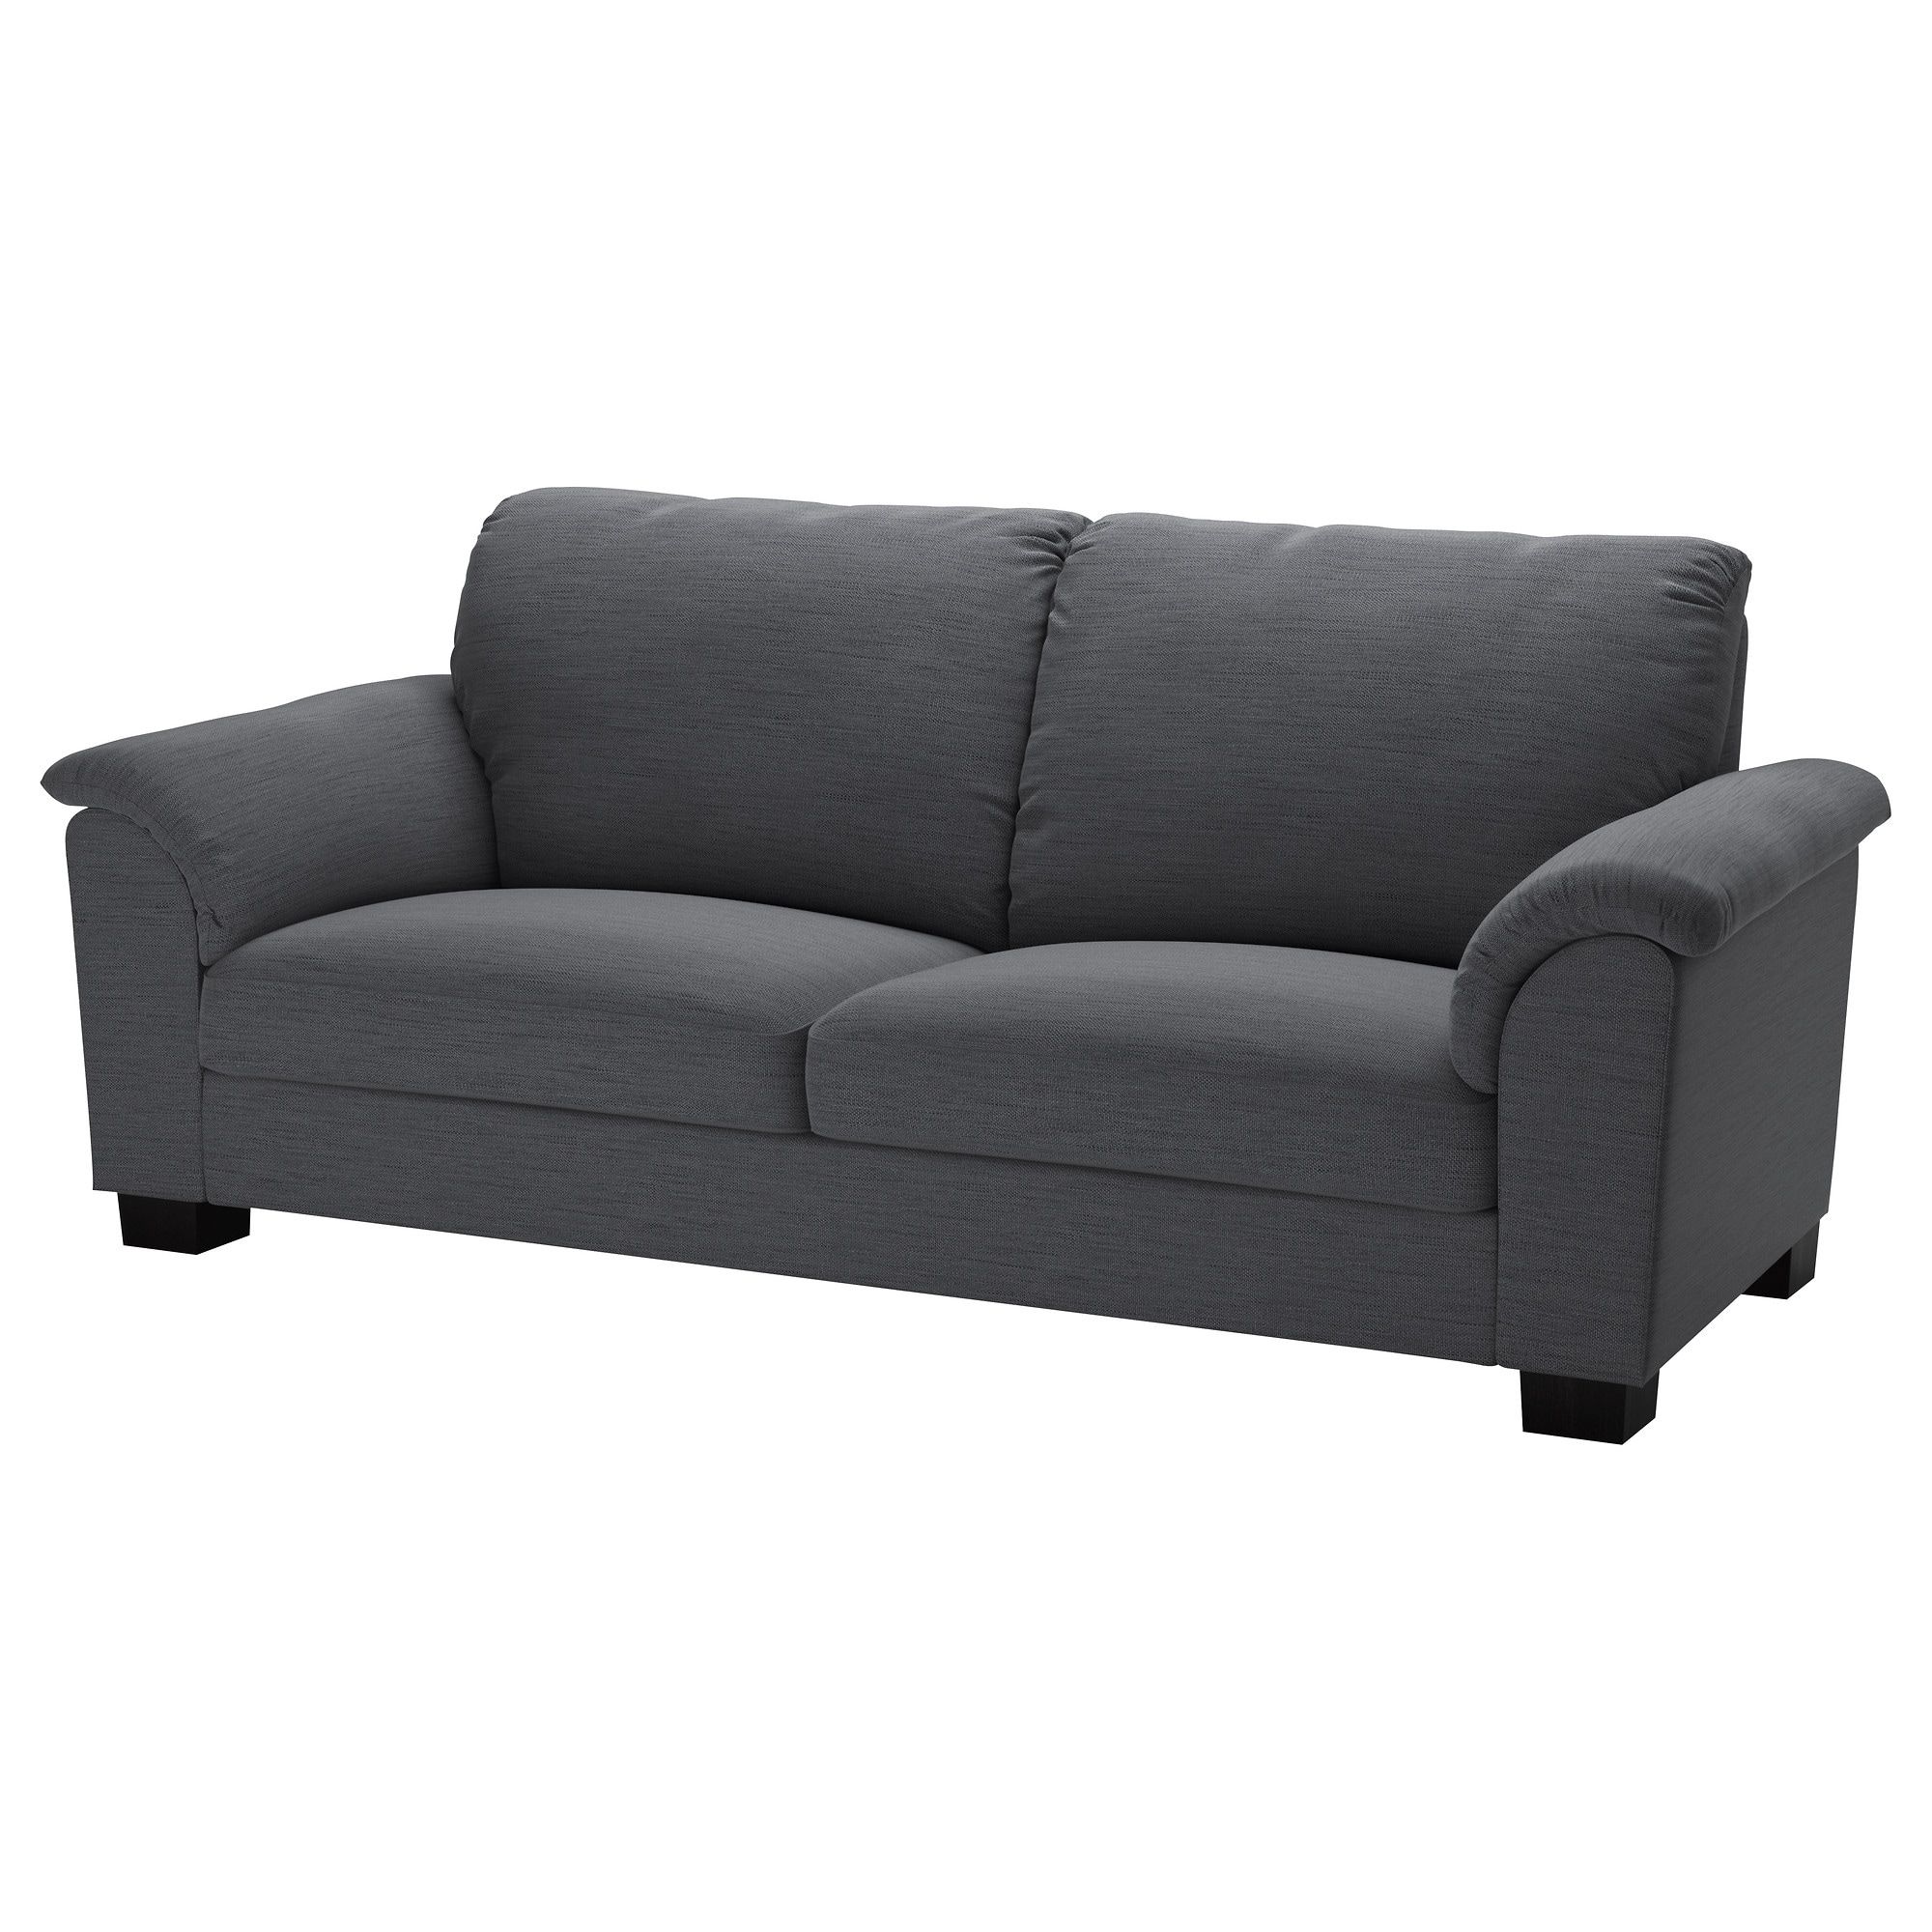 Sofas – Settees, Couches & More | Ikea Regarding Loft Arm Sofa Chairs (View 3 of 20)